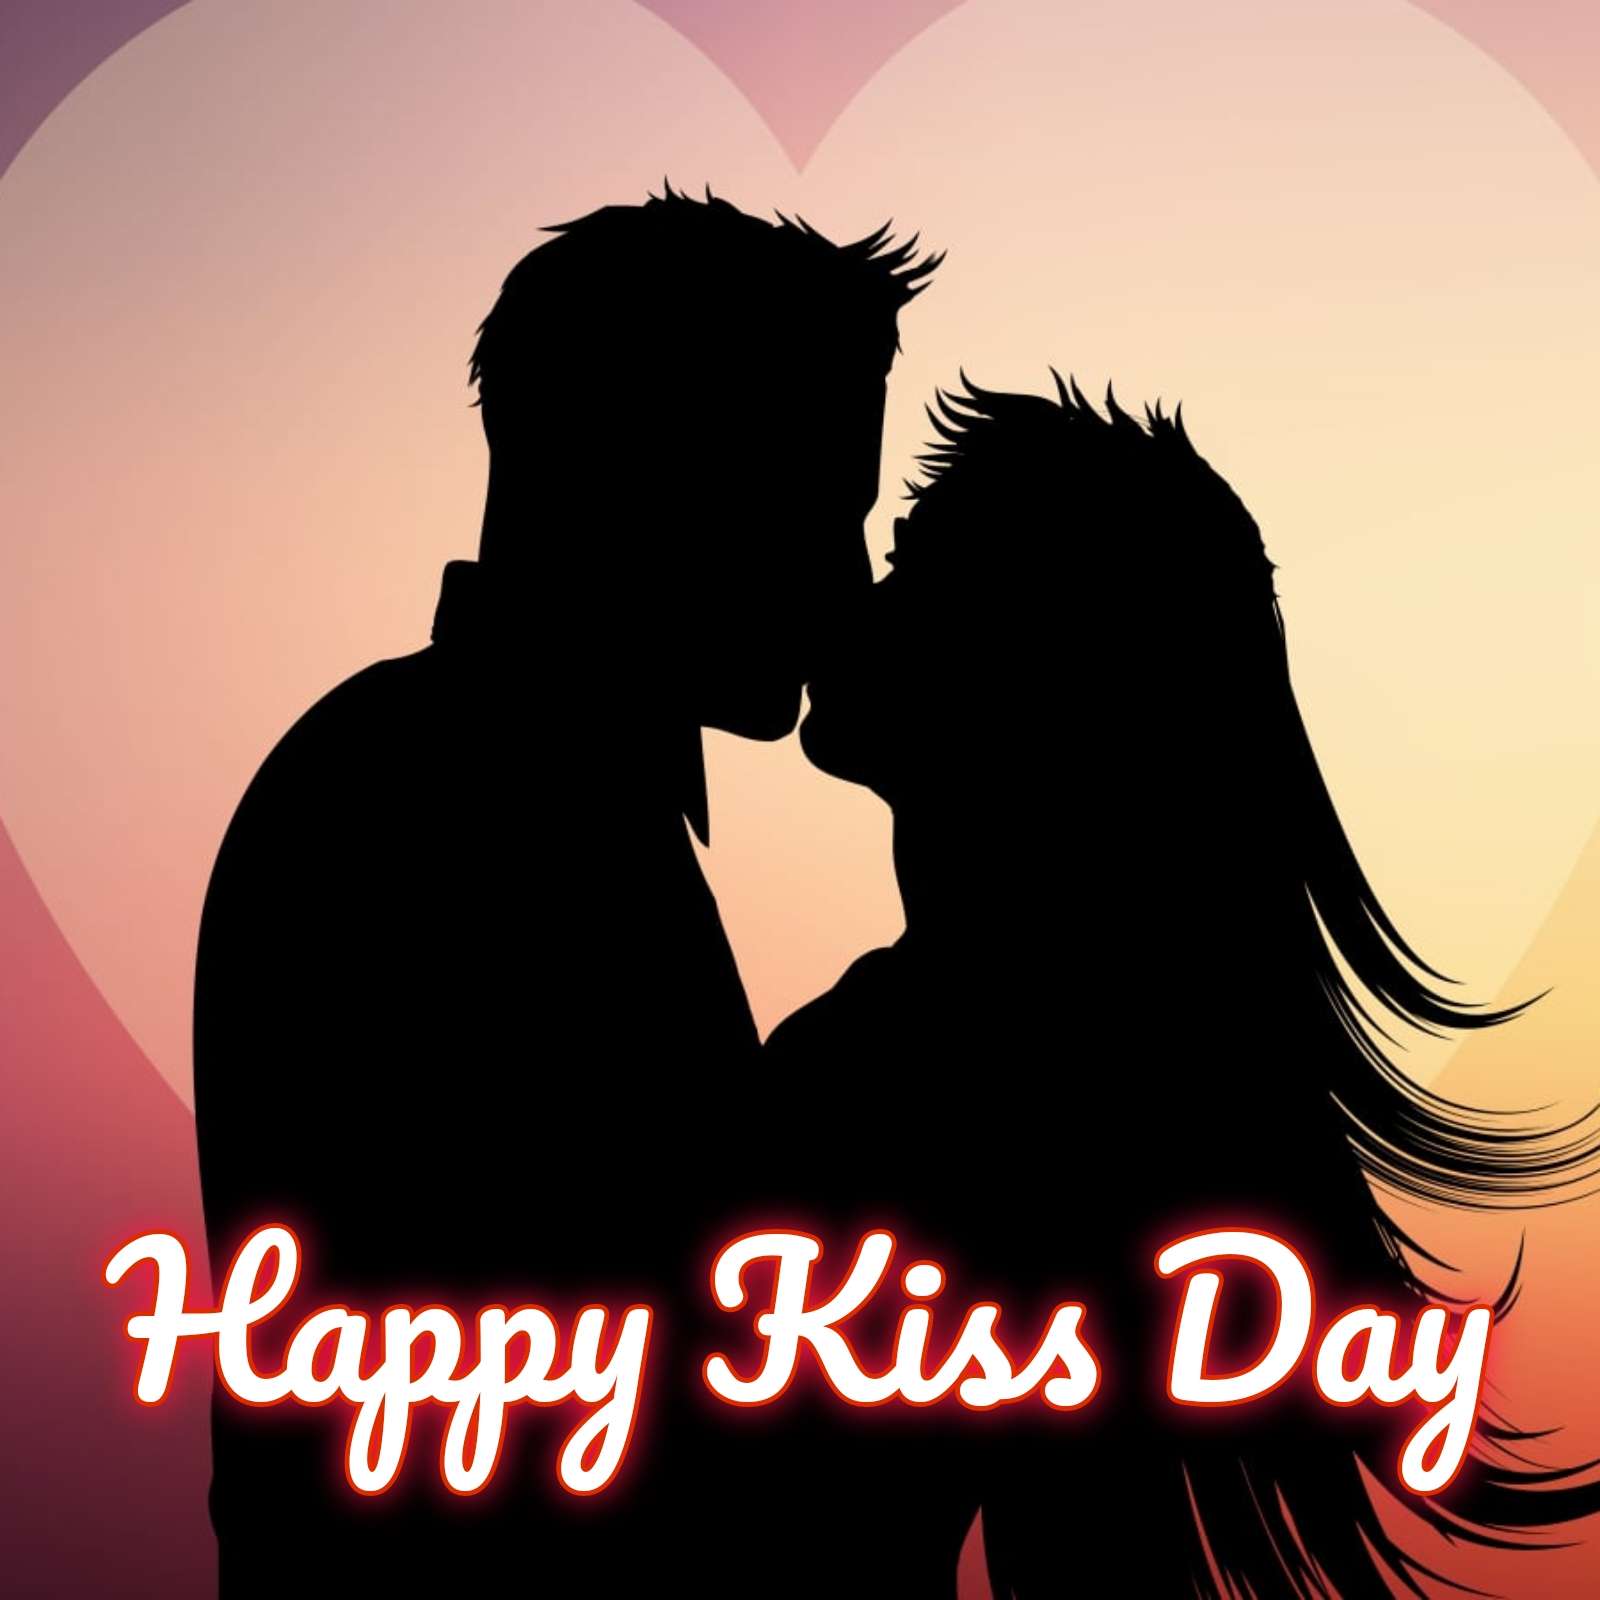 Happy Kiss Day Images For Husband Download